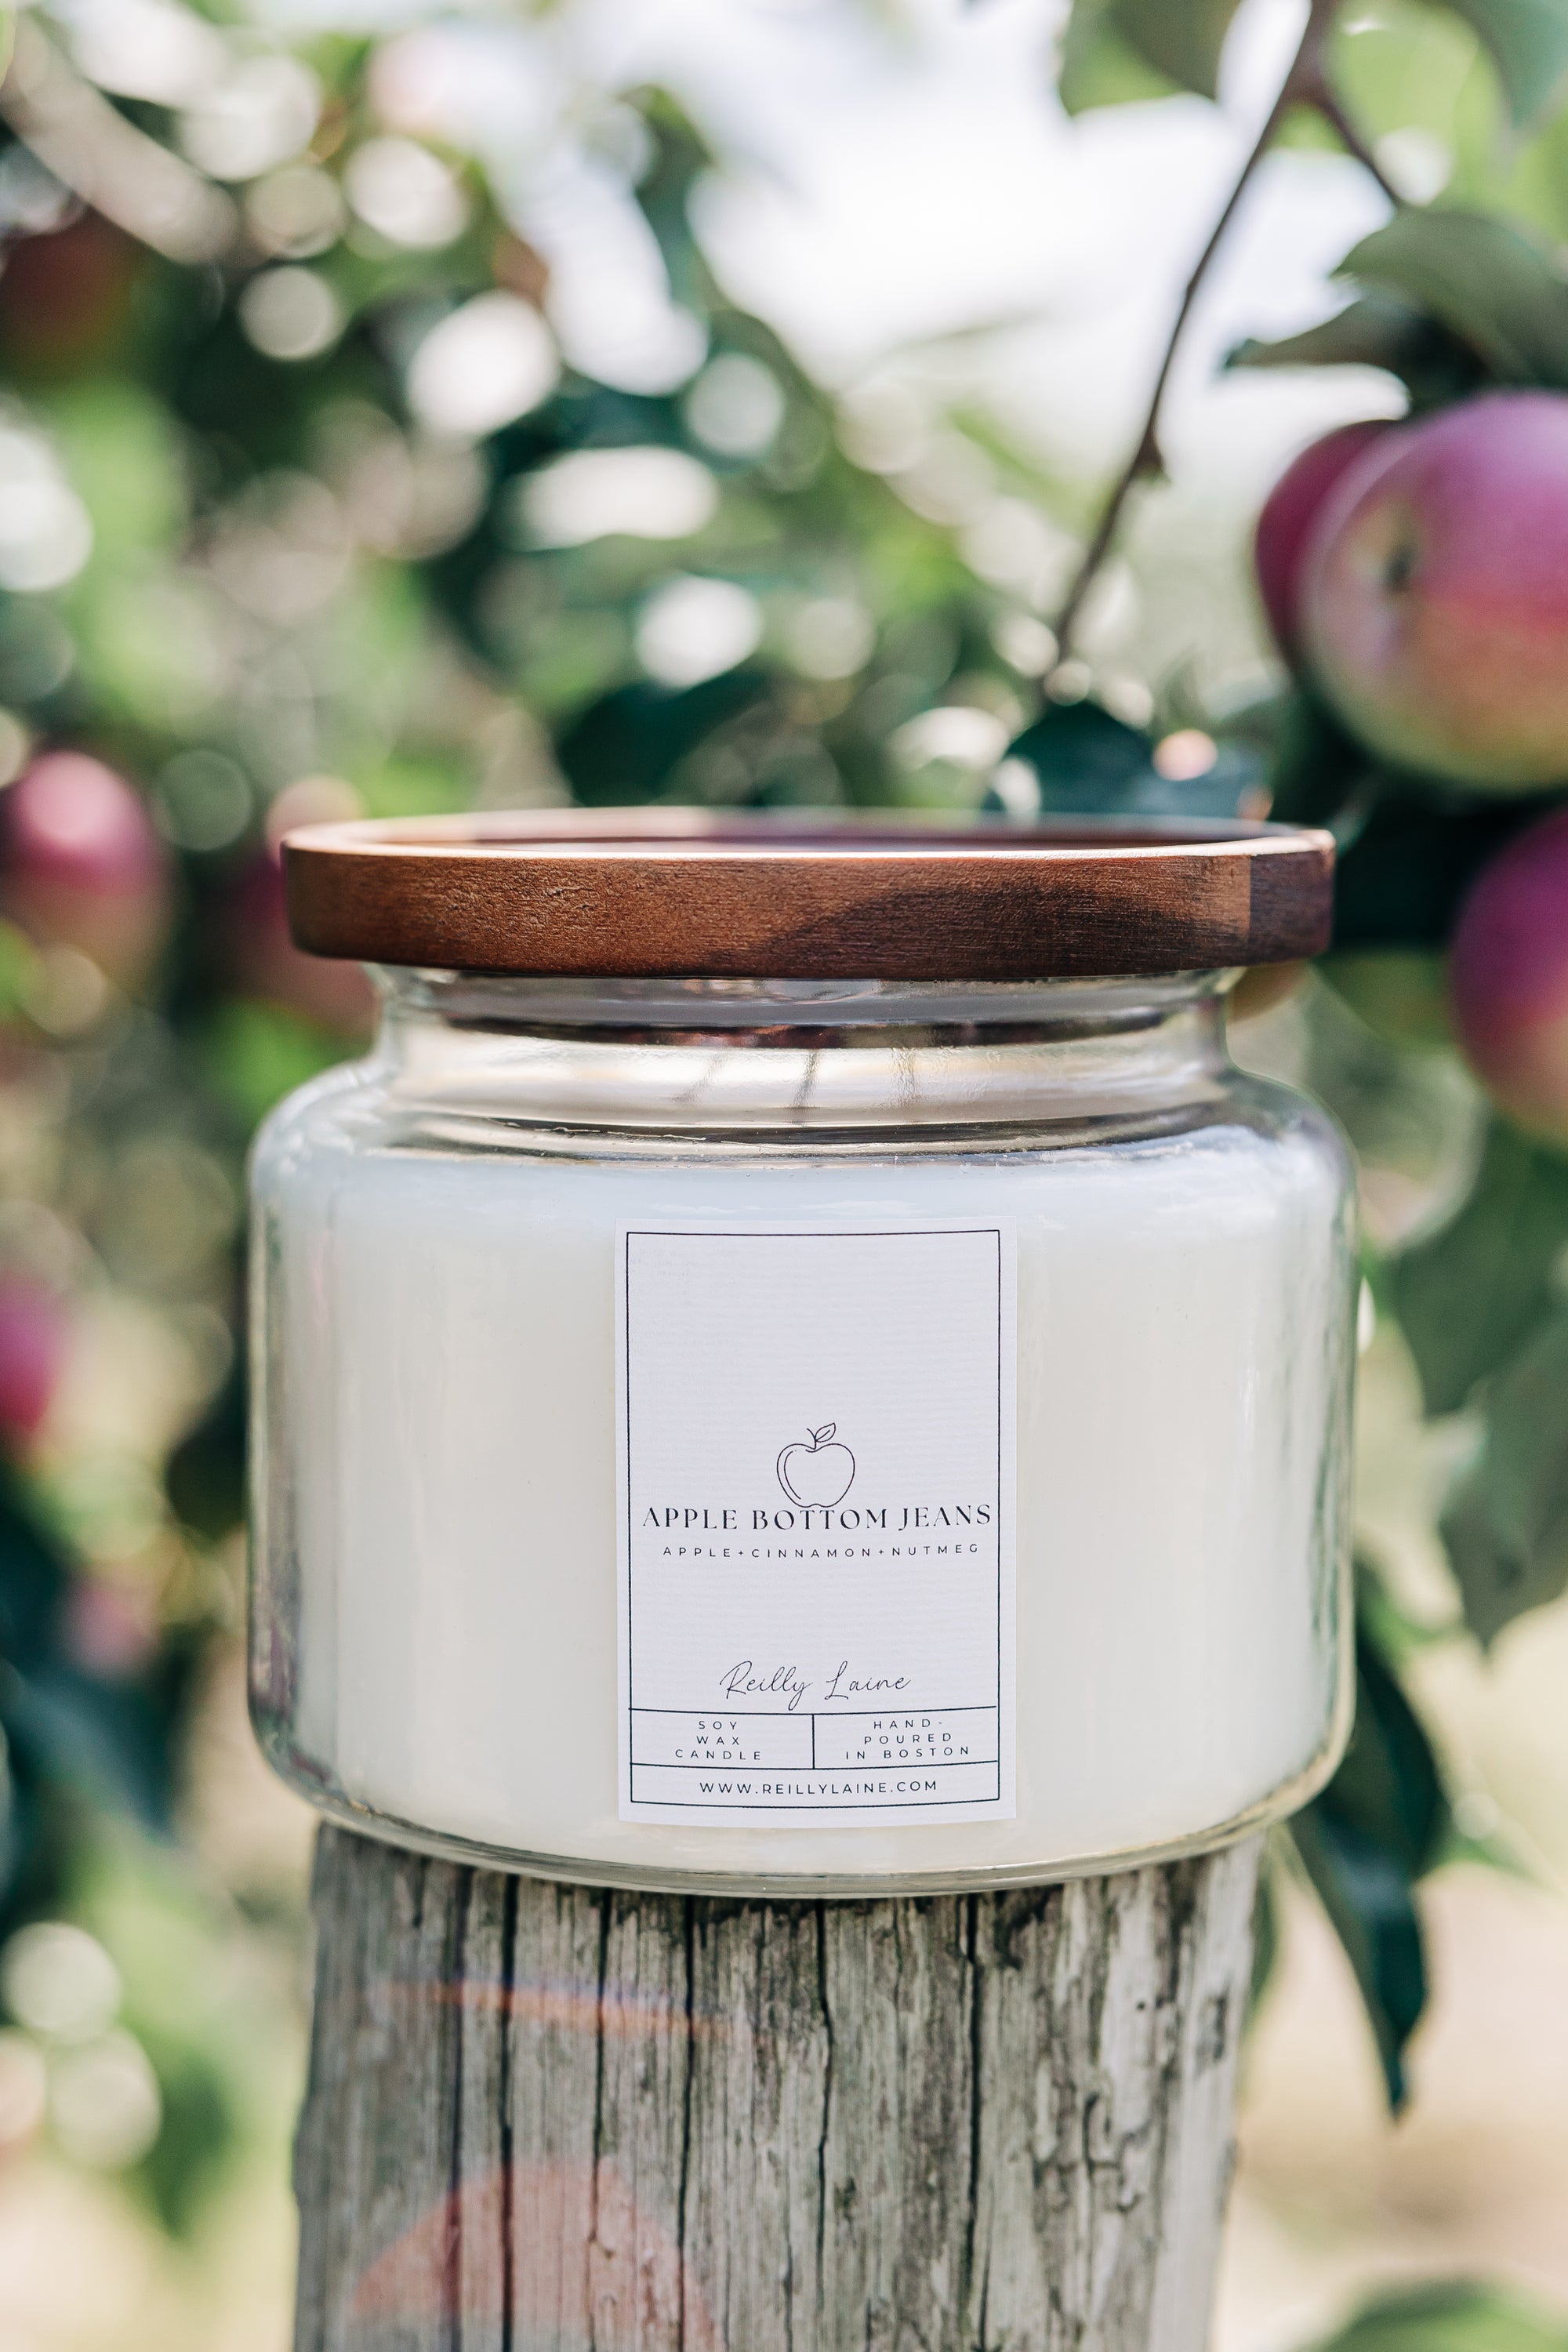 Apple Bottom Jeans Candle